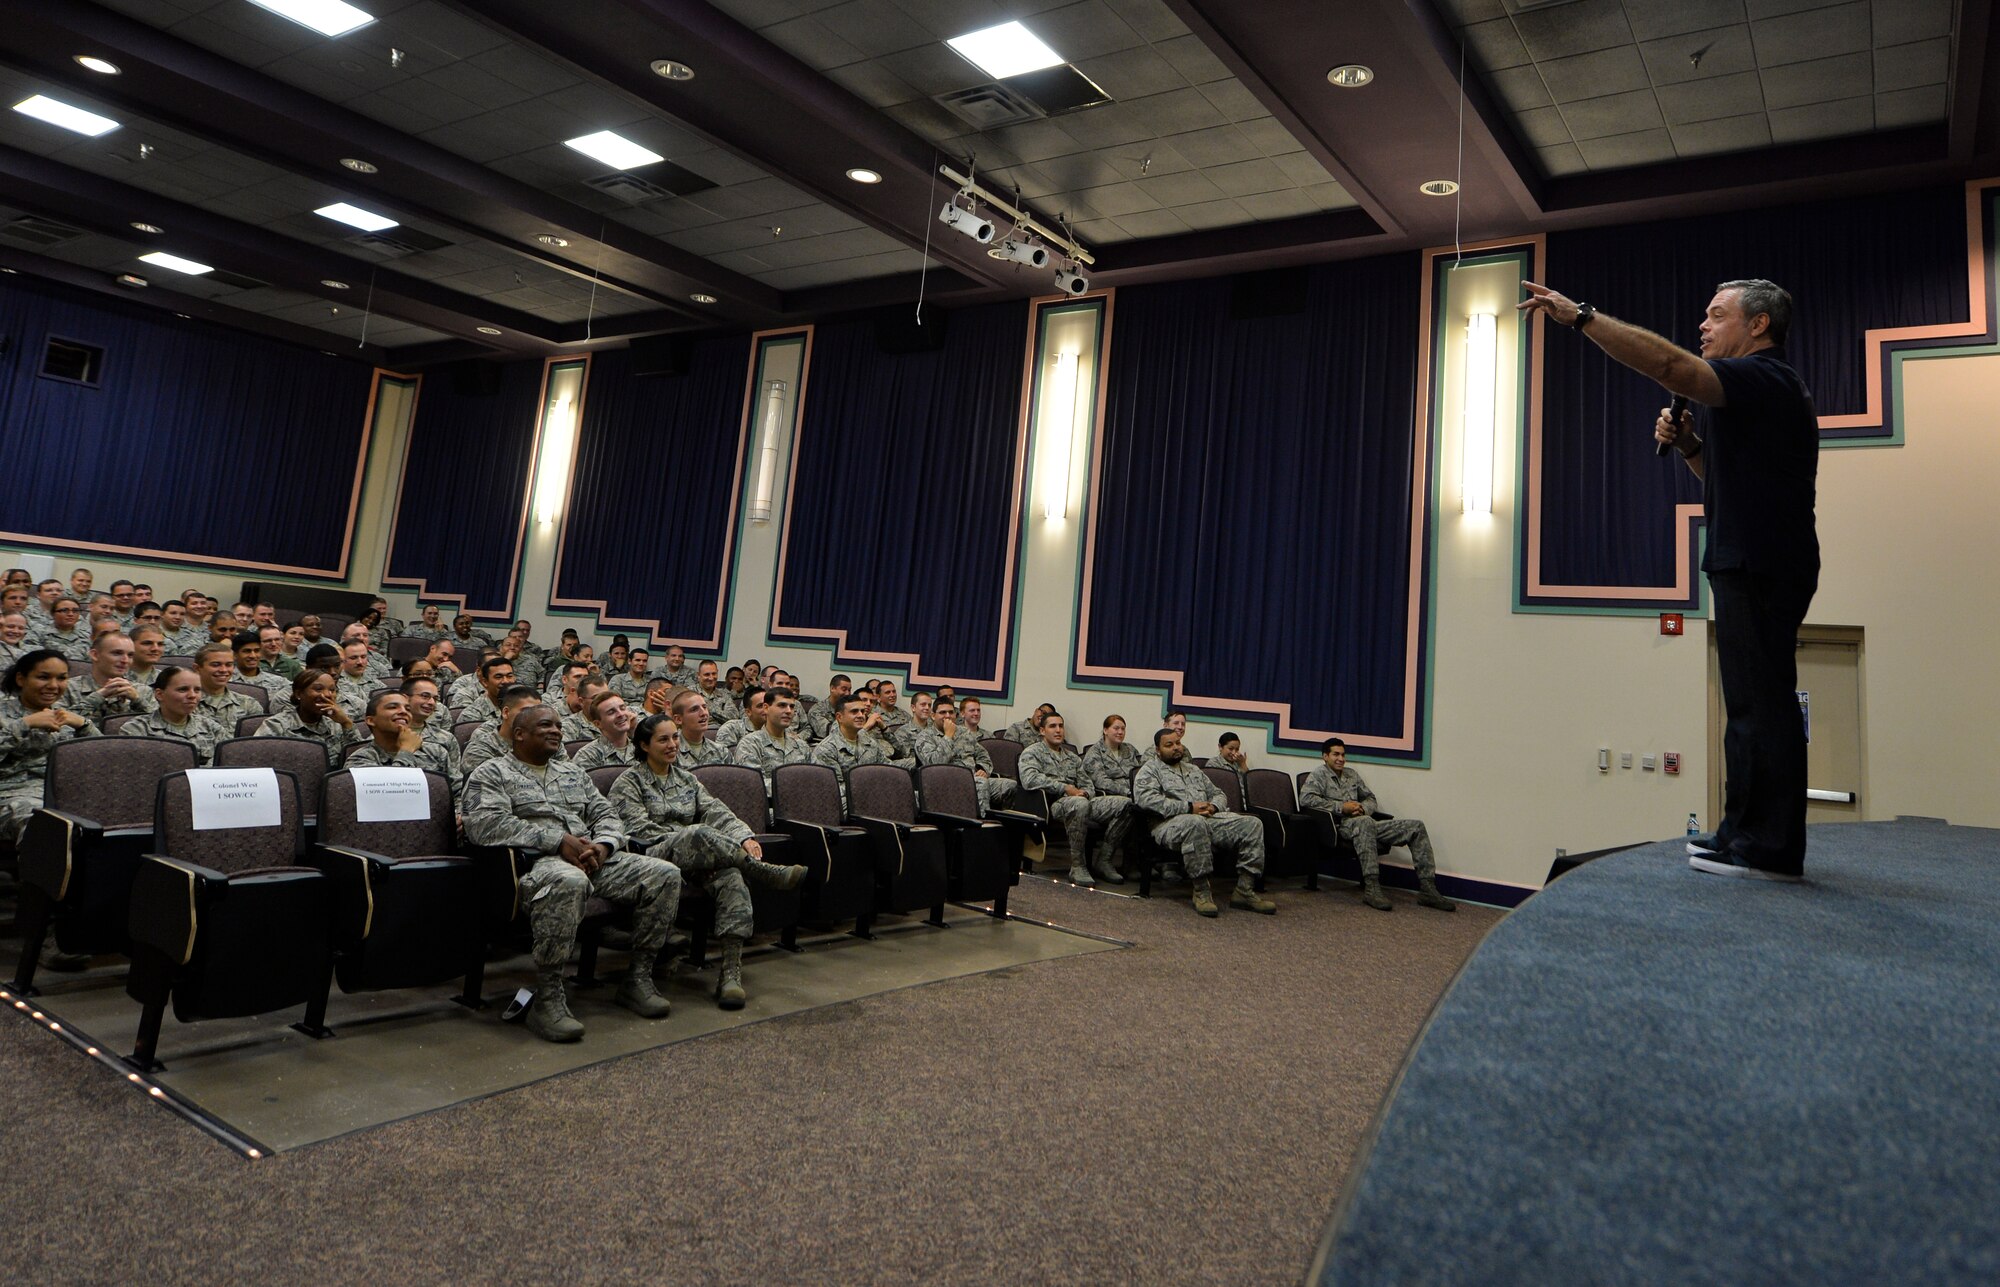 Air Commandos attend resiliency training at King Auditorium, Hurlburt Field, Fla., Sept. 24, 2014. Comedian Bernie McGrenahan spoke to Airmen about the importance of resiliency in a humor filled presentation. (U.S. Air Force photo/Senior Airman Christopher Callaway)  